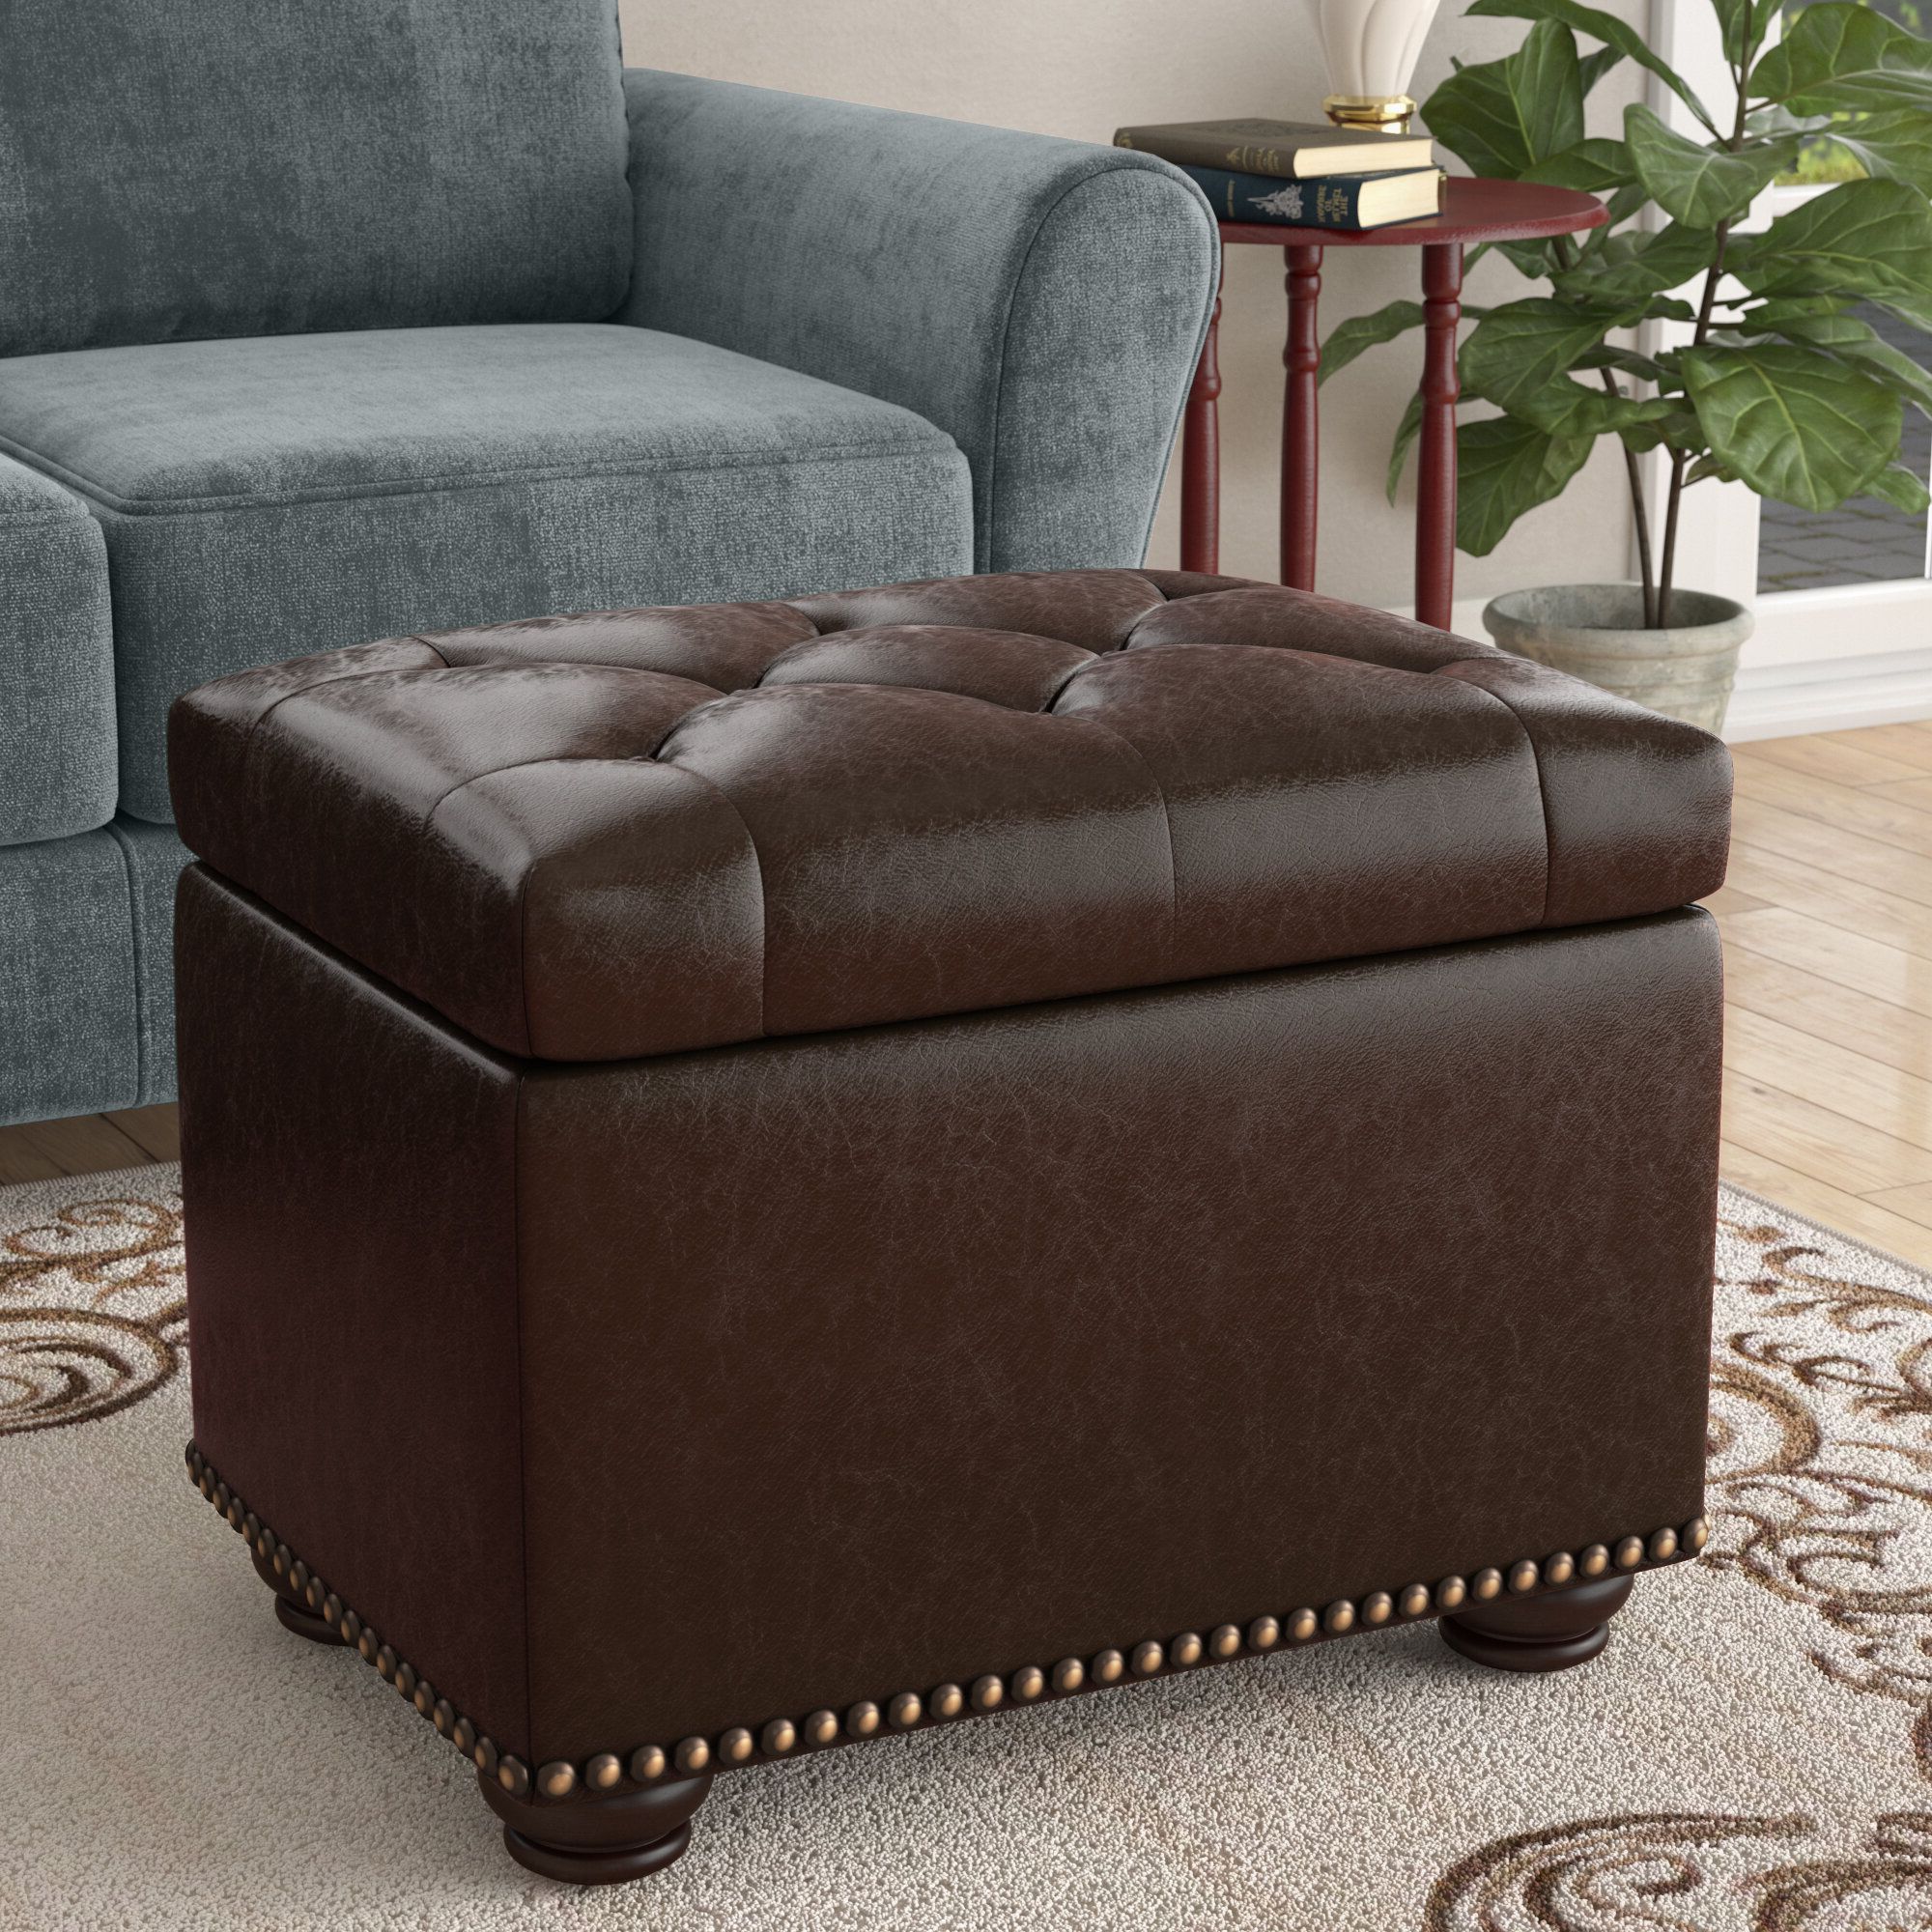 Dark Brown Leather Pouf Ottomans Inside Newest Boston Espresso Brown Tufted Leather Storage Ottoman Coffee Table (View 3 of 10)